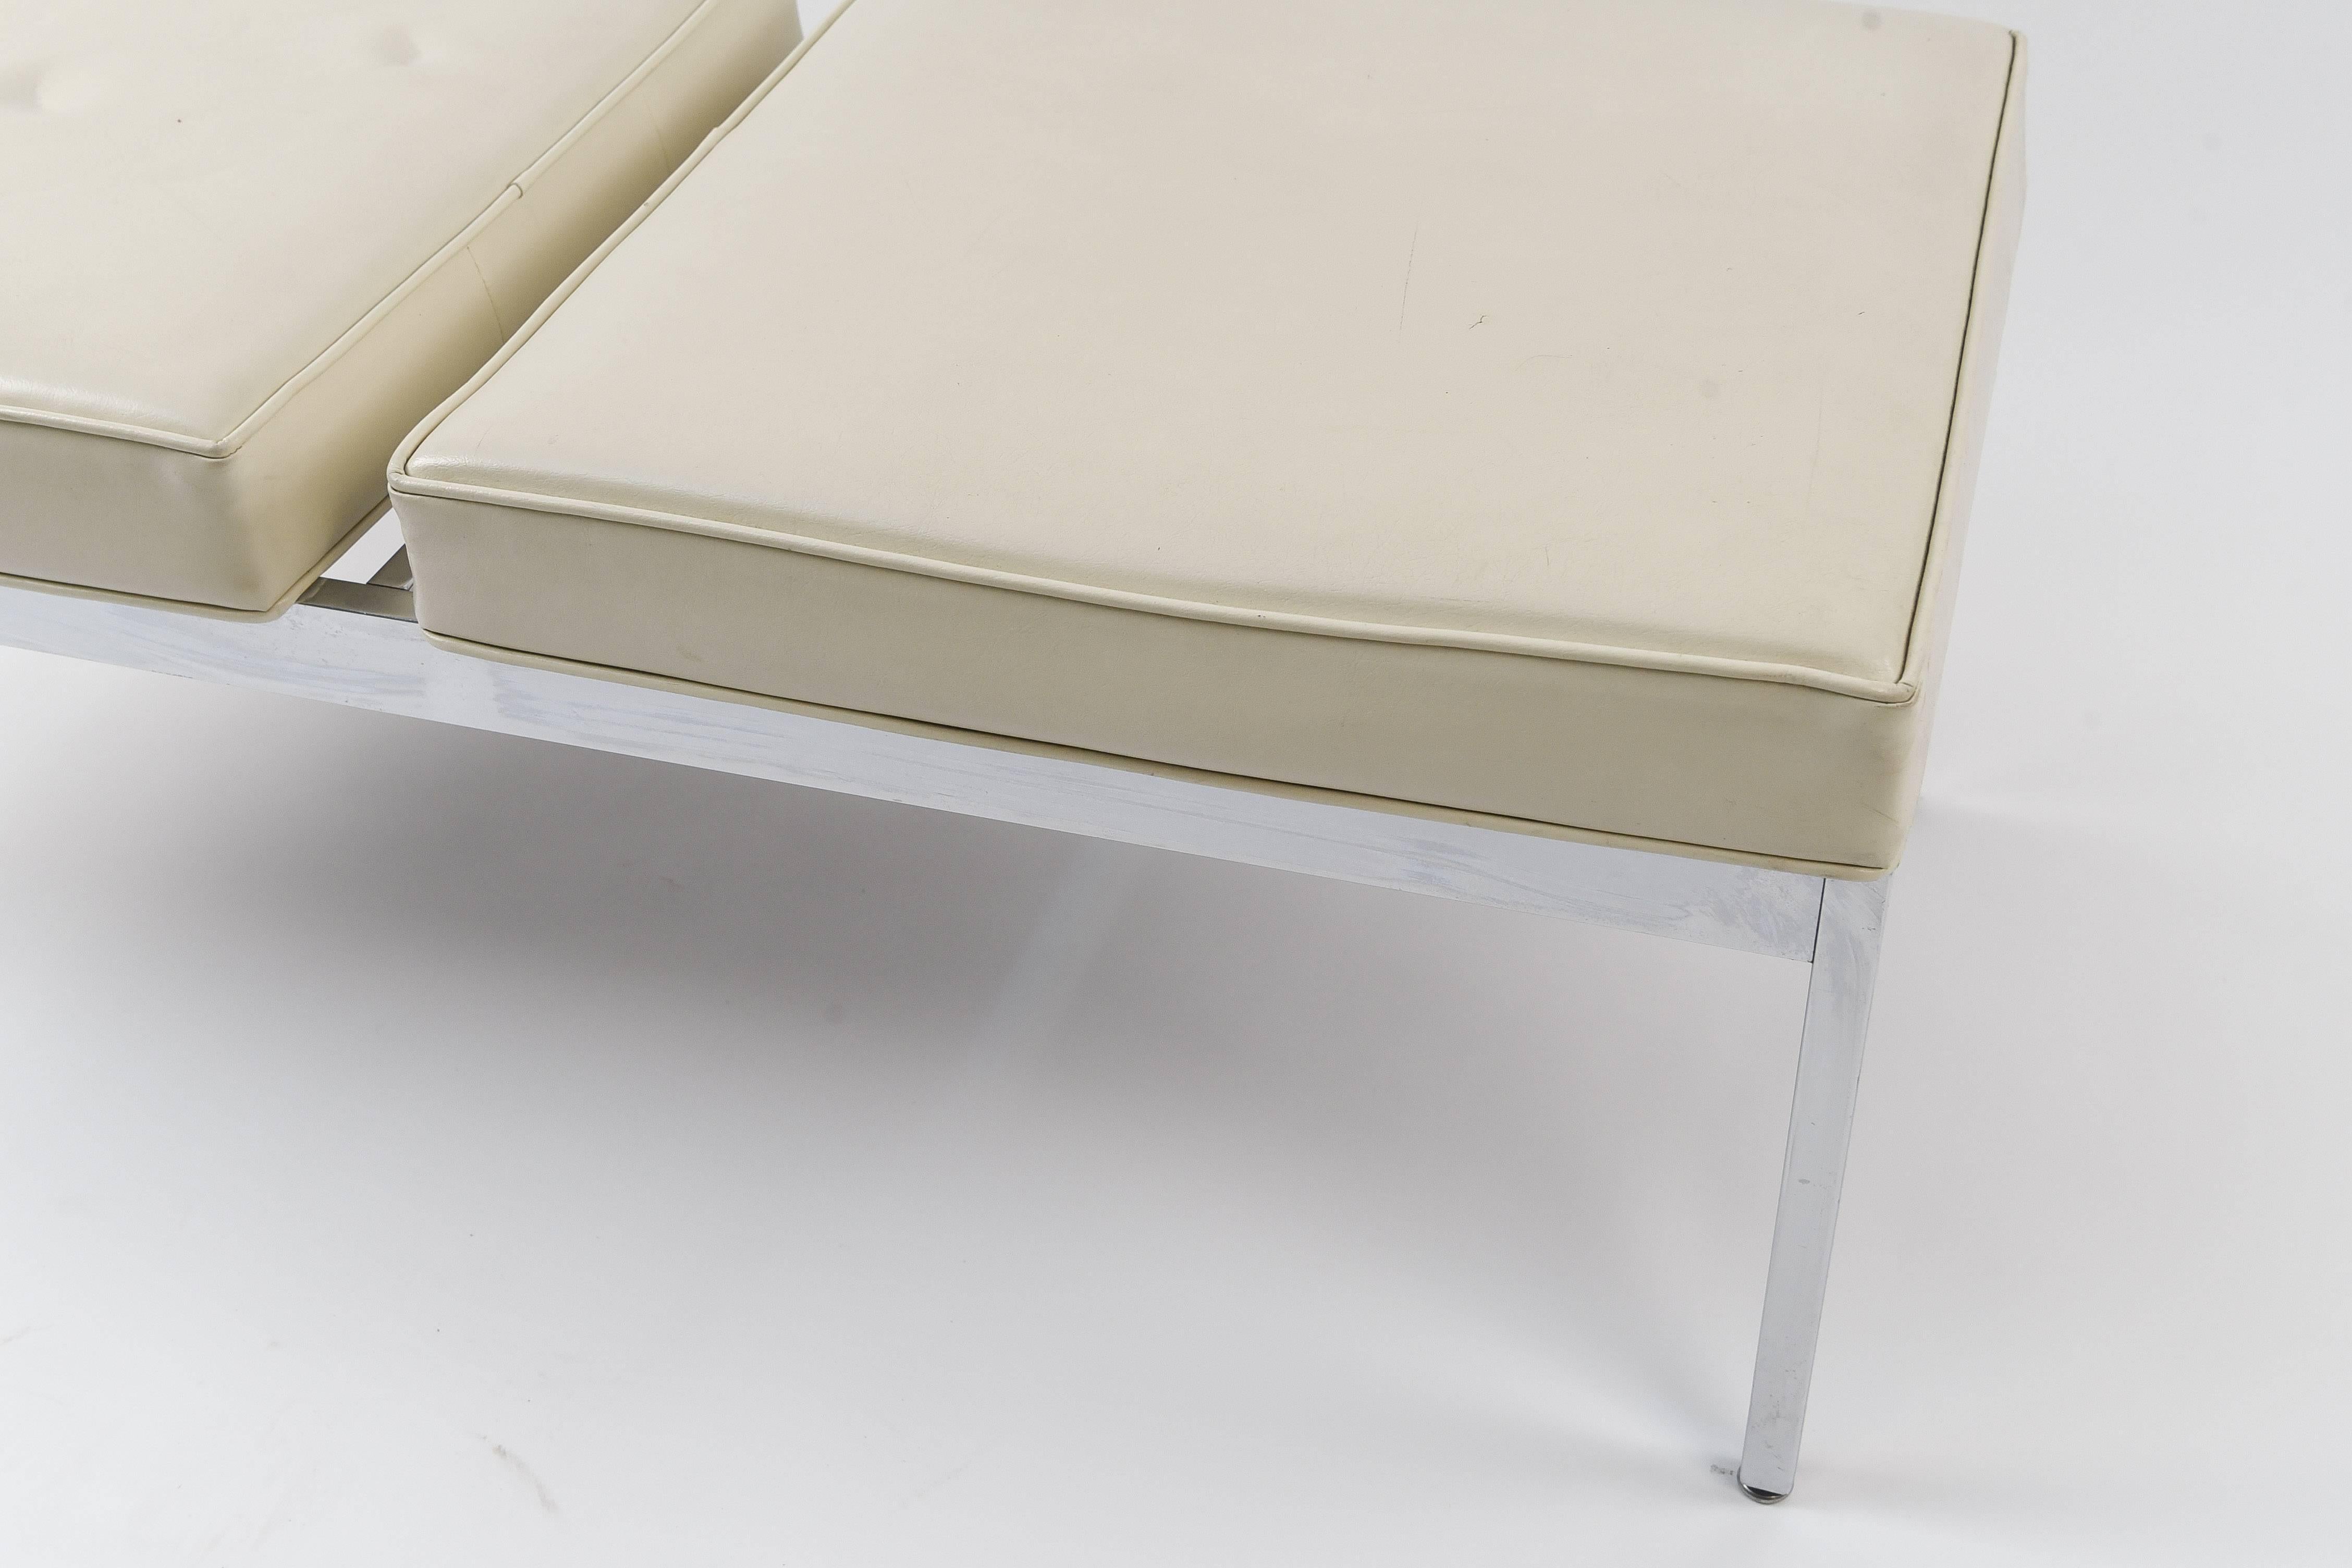 A two-seat midcentury bench on a chrome base featuring seats upholstered in vinyl. Has a sleek modern appeal. The divided seats are an interesting element.